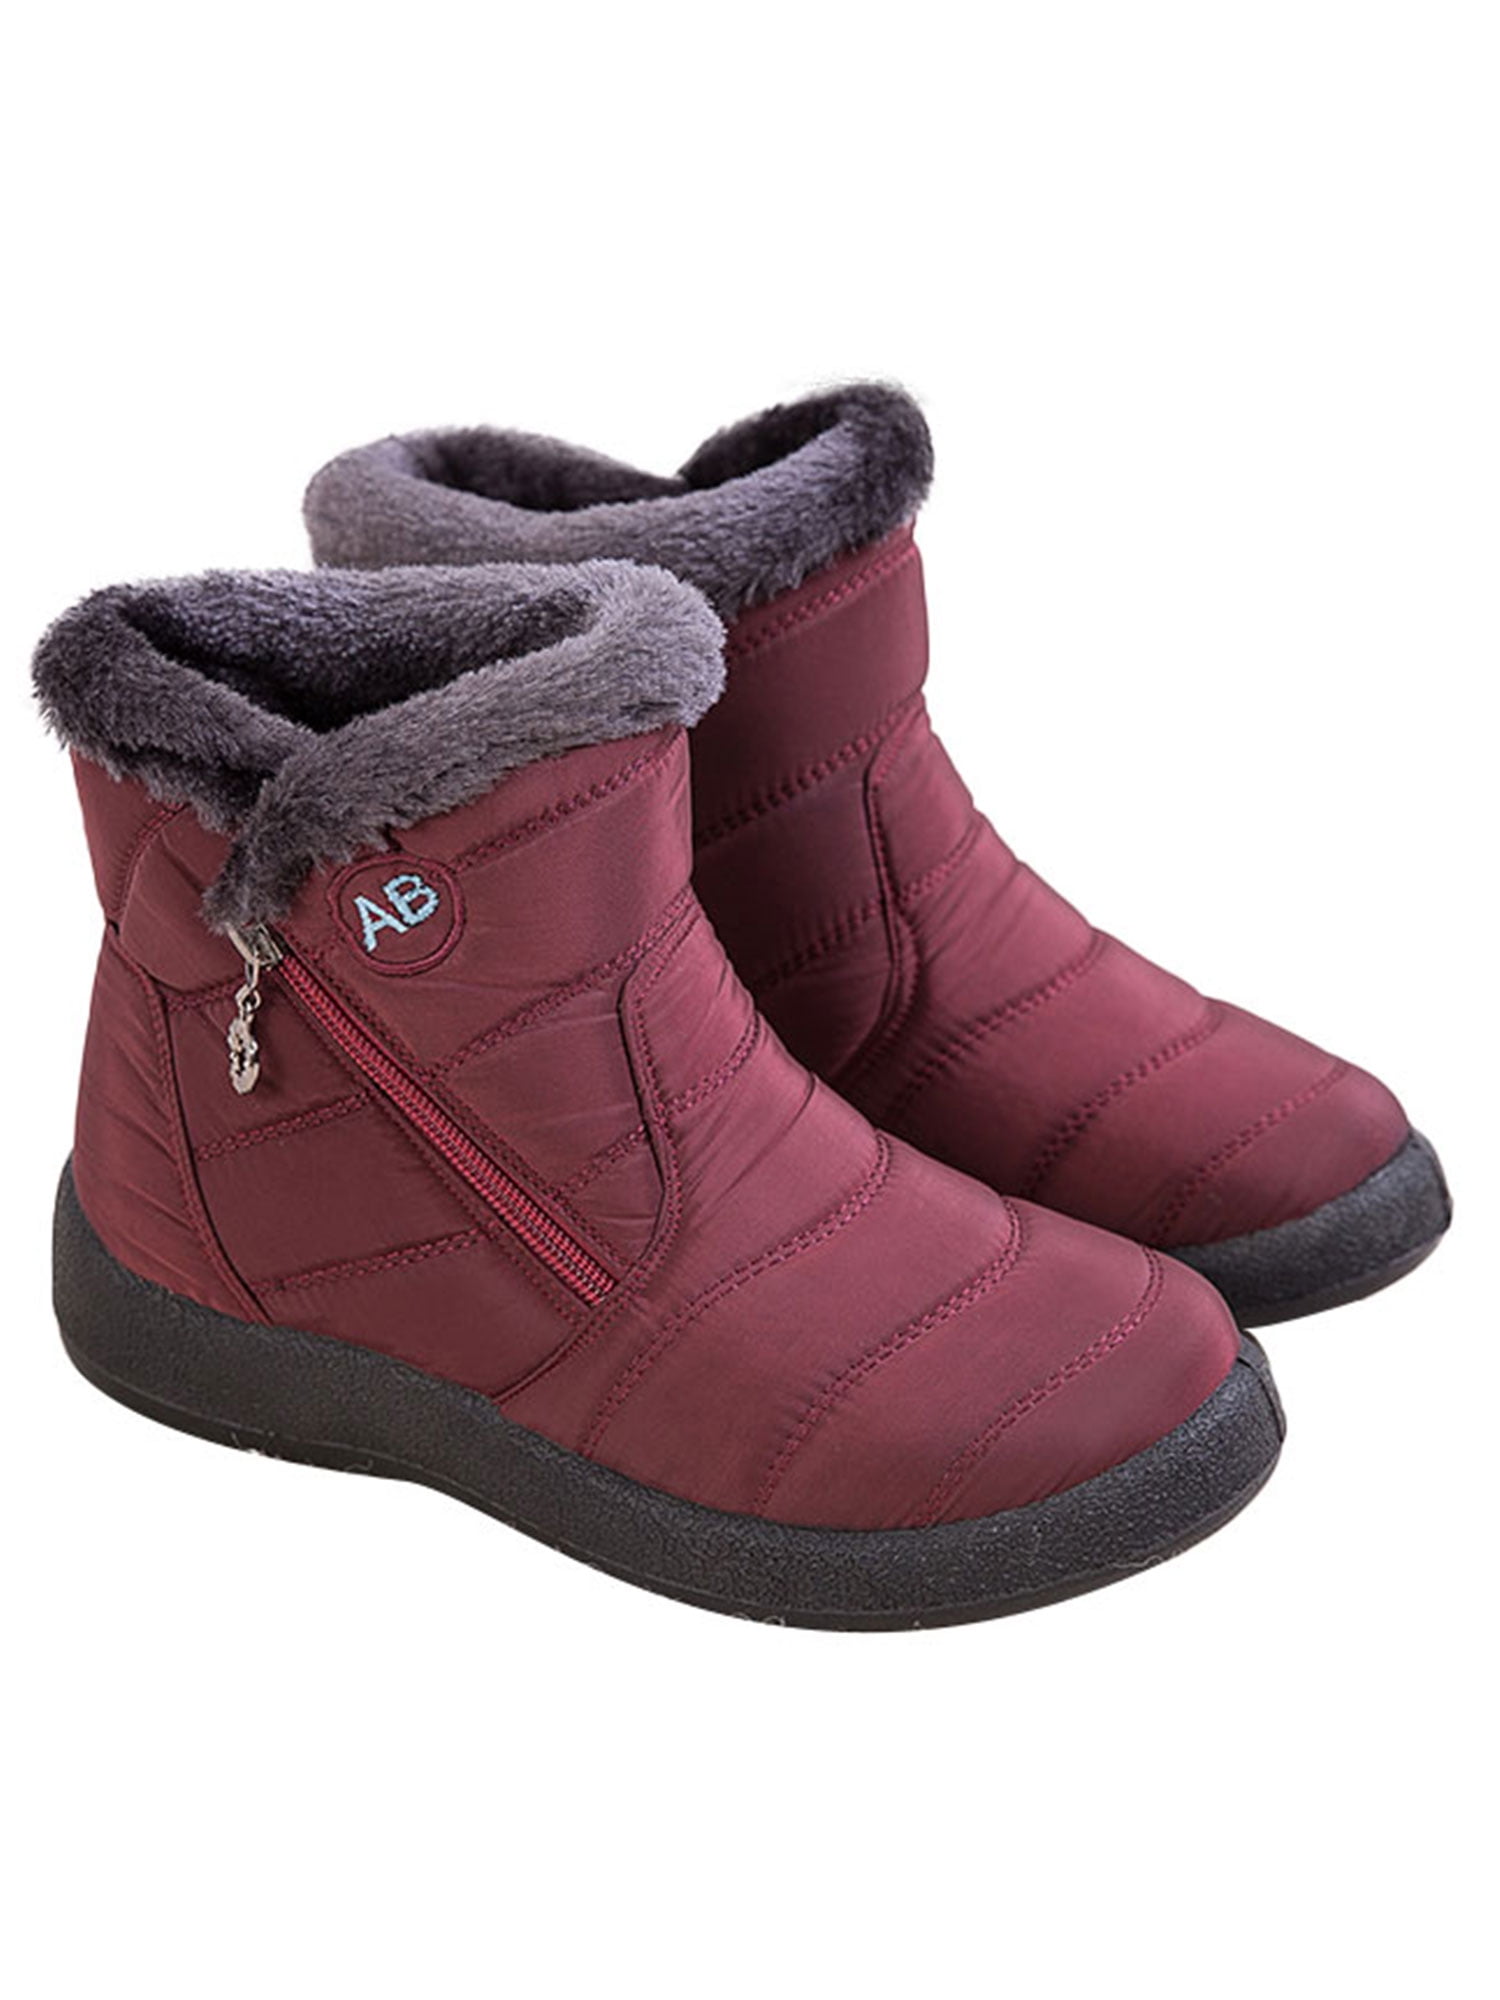 Womens Winter Snow Boots Fur Lined Warm Ankle Boots Slip On Waterproof Outdoor Booties Comfortable Shoes for Women